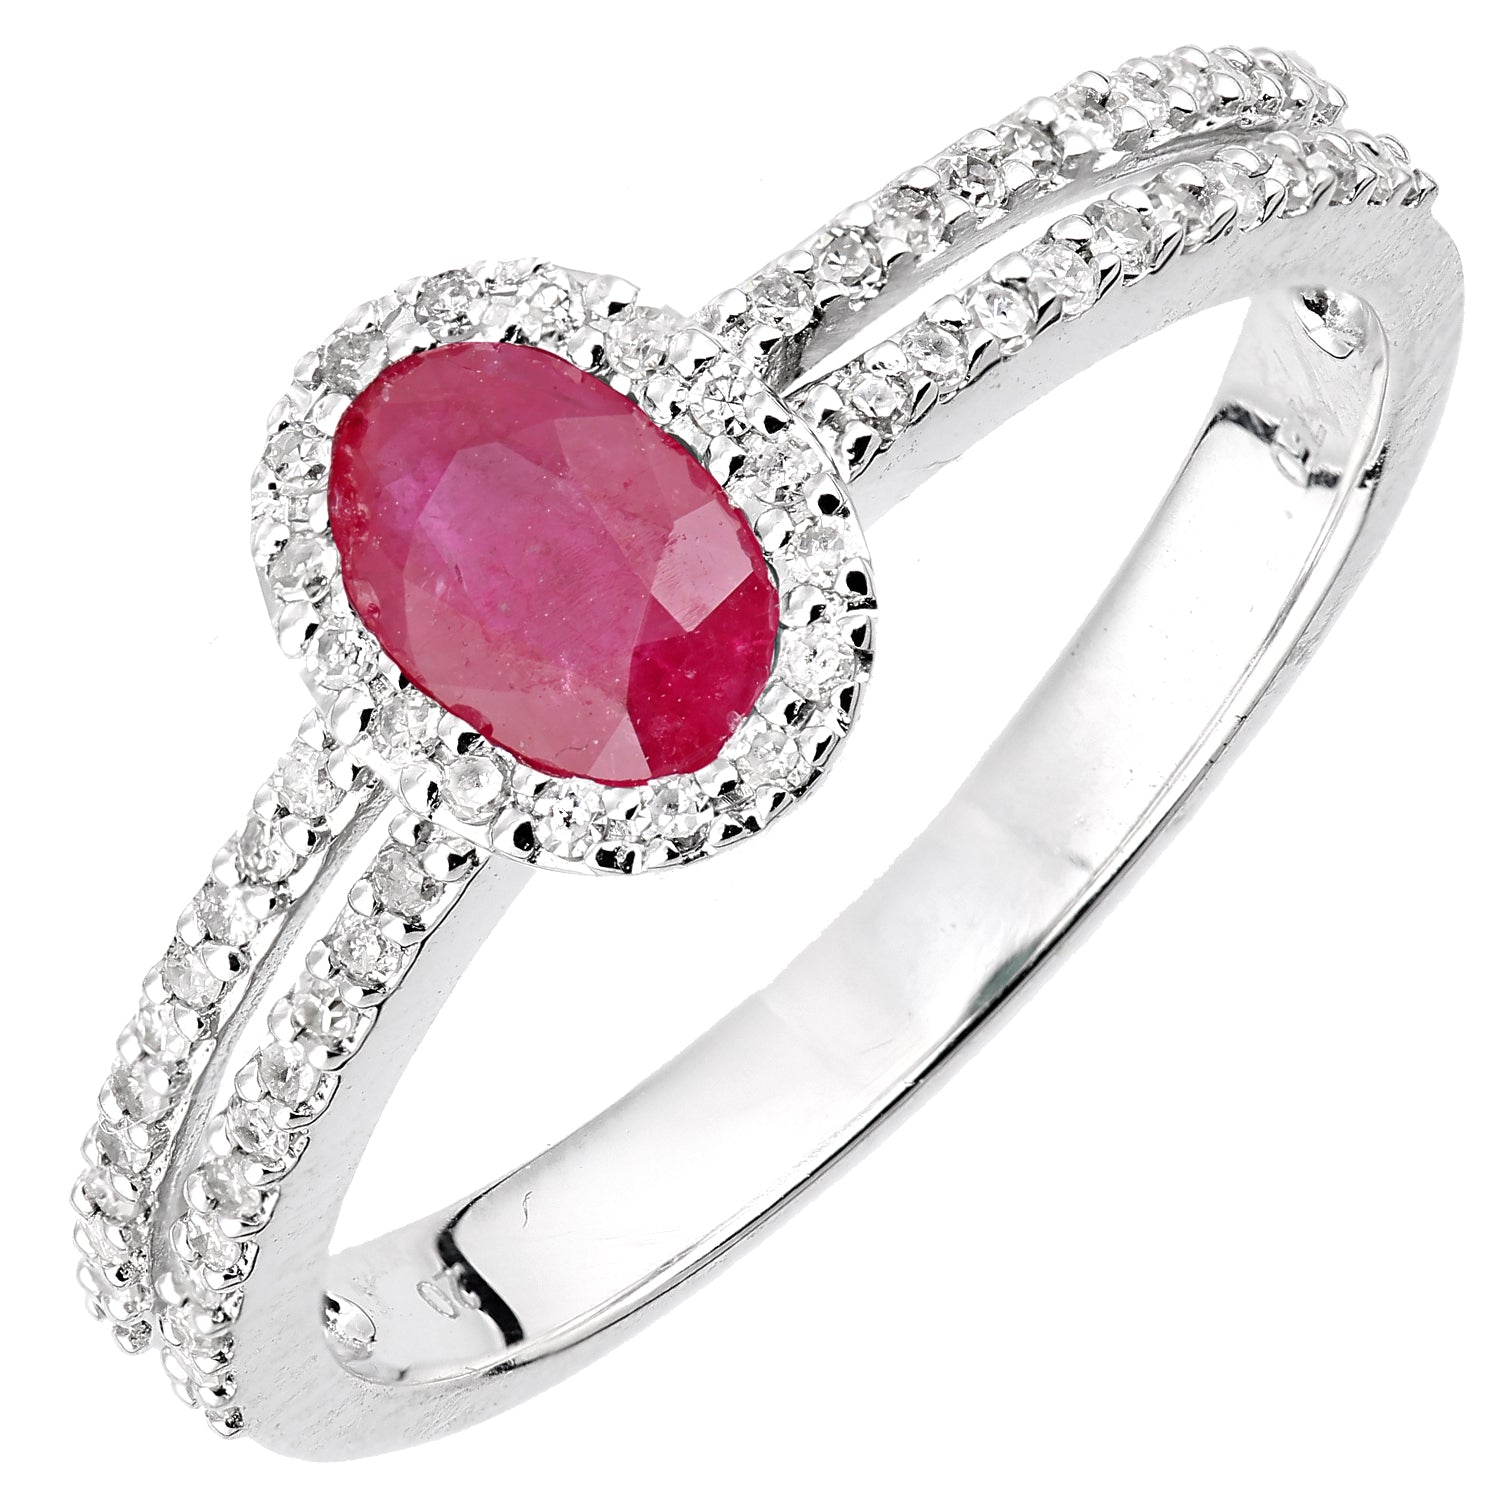 18ct White Gold  20pts Diamond Oval 0.6ct Ruby Halo Cluster Ring - DR1AXL615W18RU